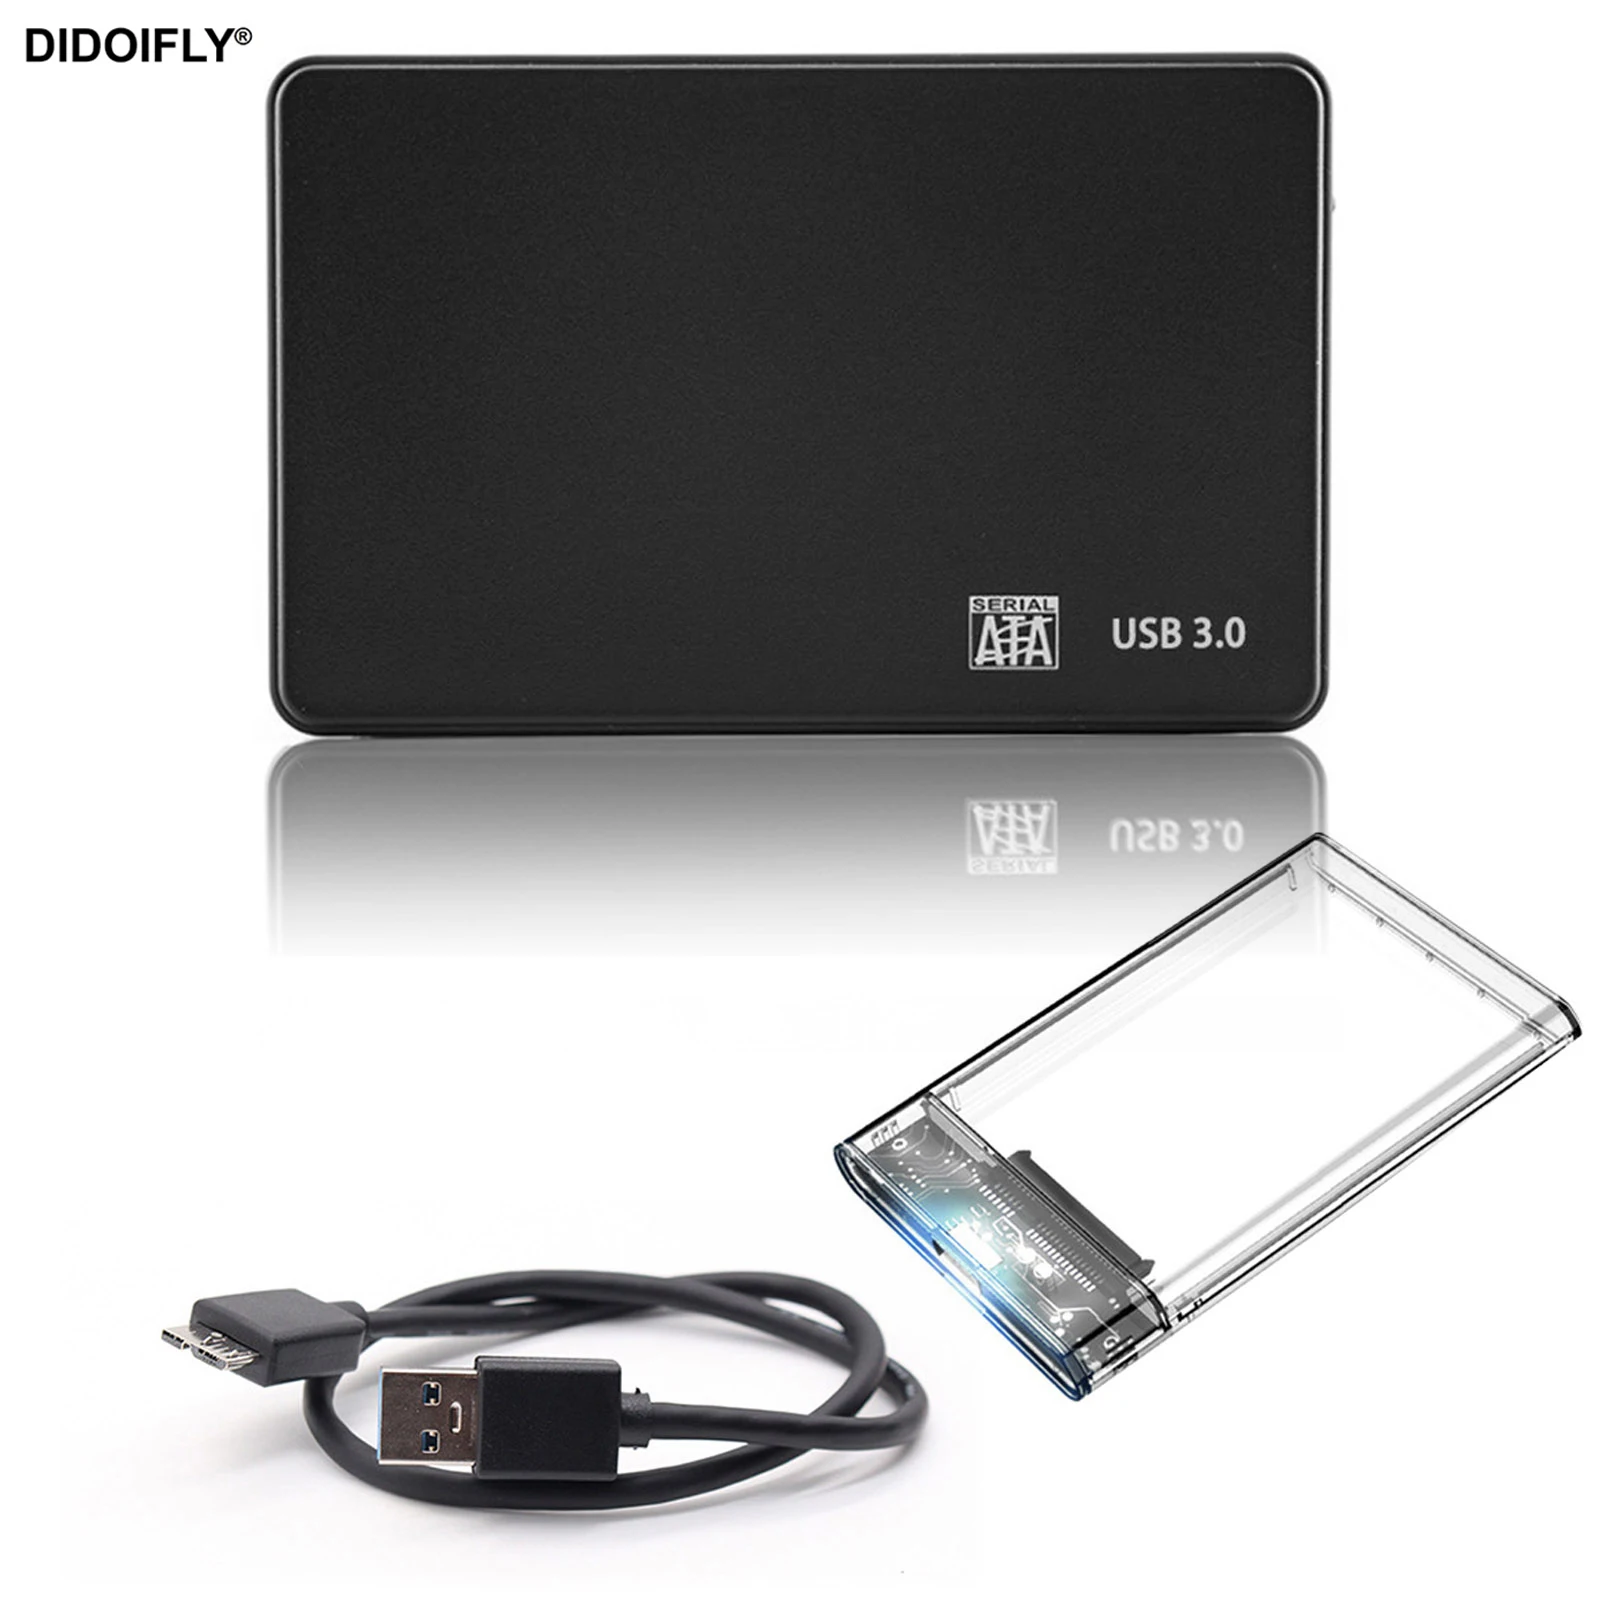 

Harddisk Boxs HDD SSD Case 2.5 External Hard Disk Drive Extract SATA To USB 3.0/2.0 Type-C Adapter Enclosure 6Gbps Data Cable